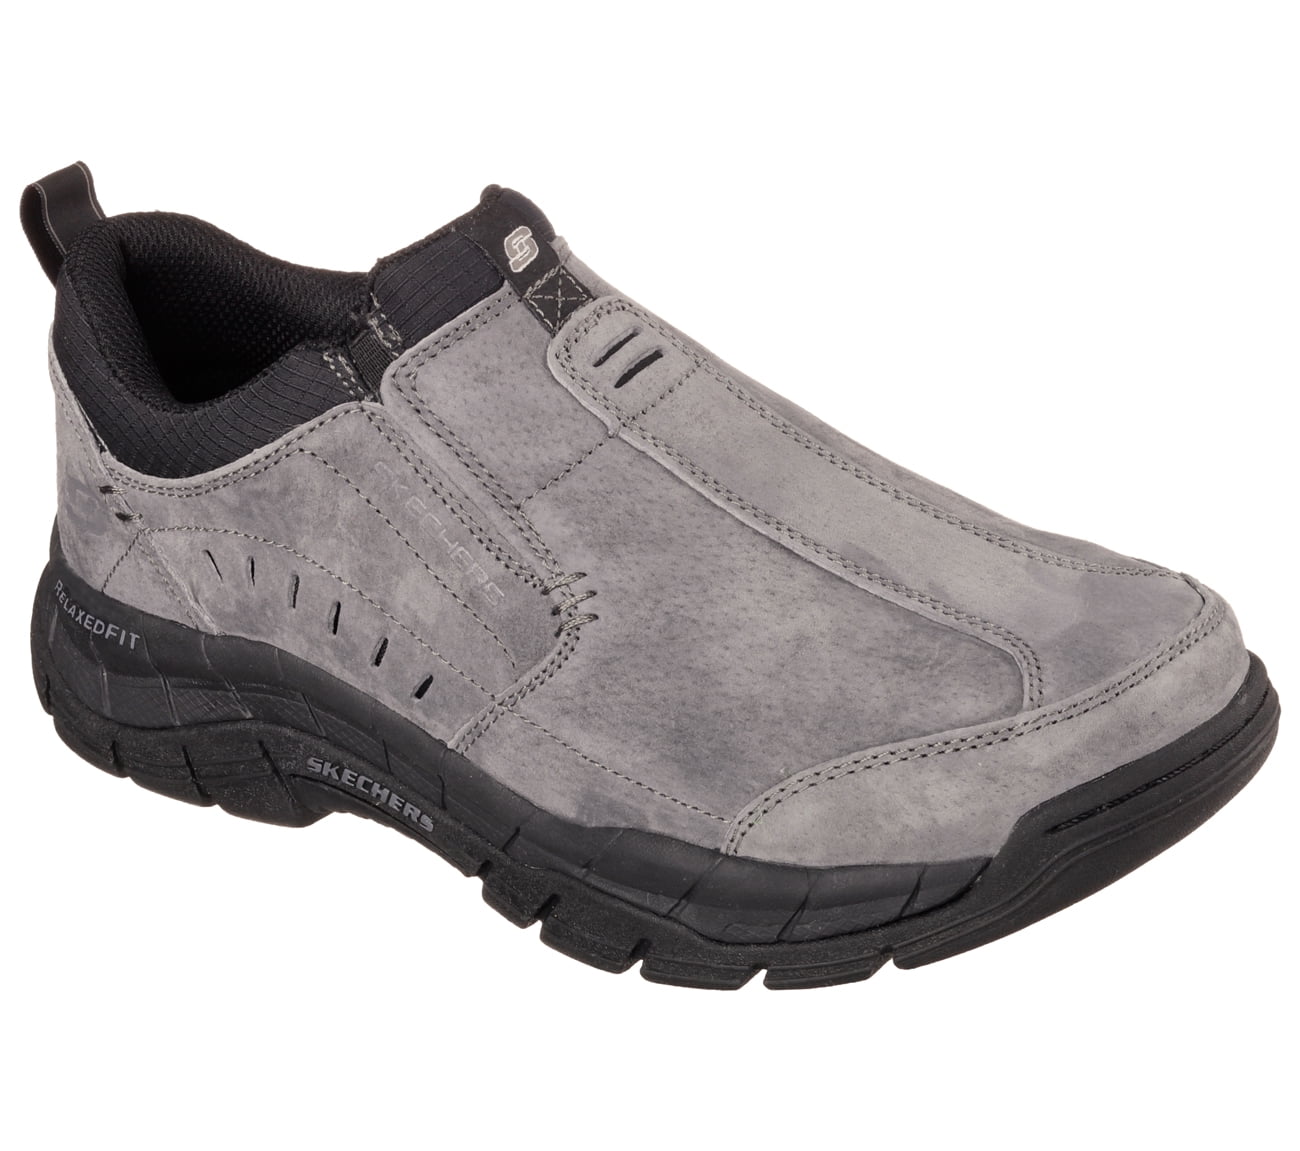 Overlevelse At opdage Learner Skechers Men's Relaxed Fit Rig Mountain Top Sneaker - Walmart.com